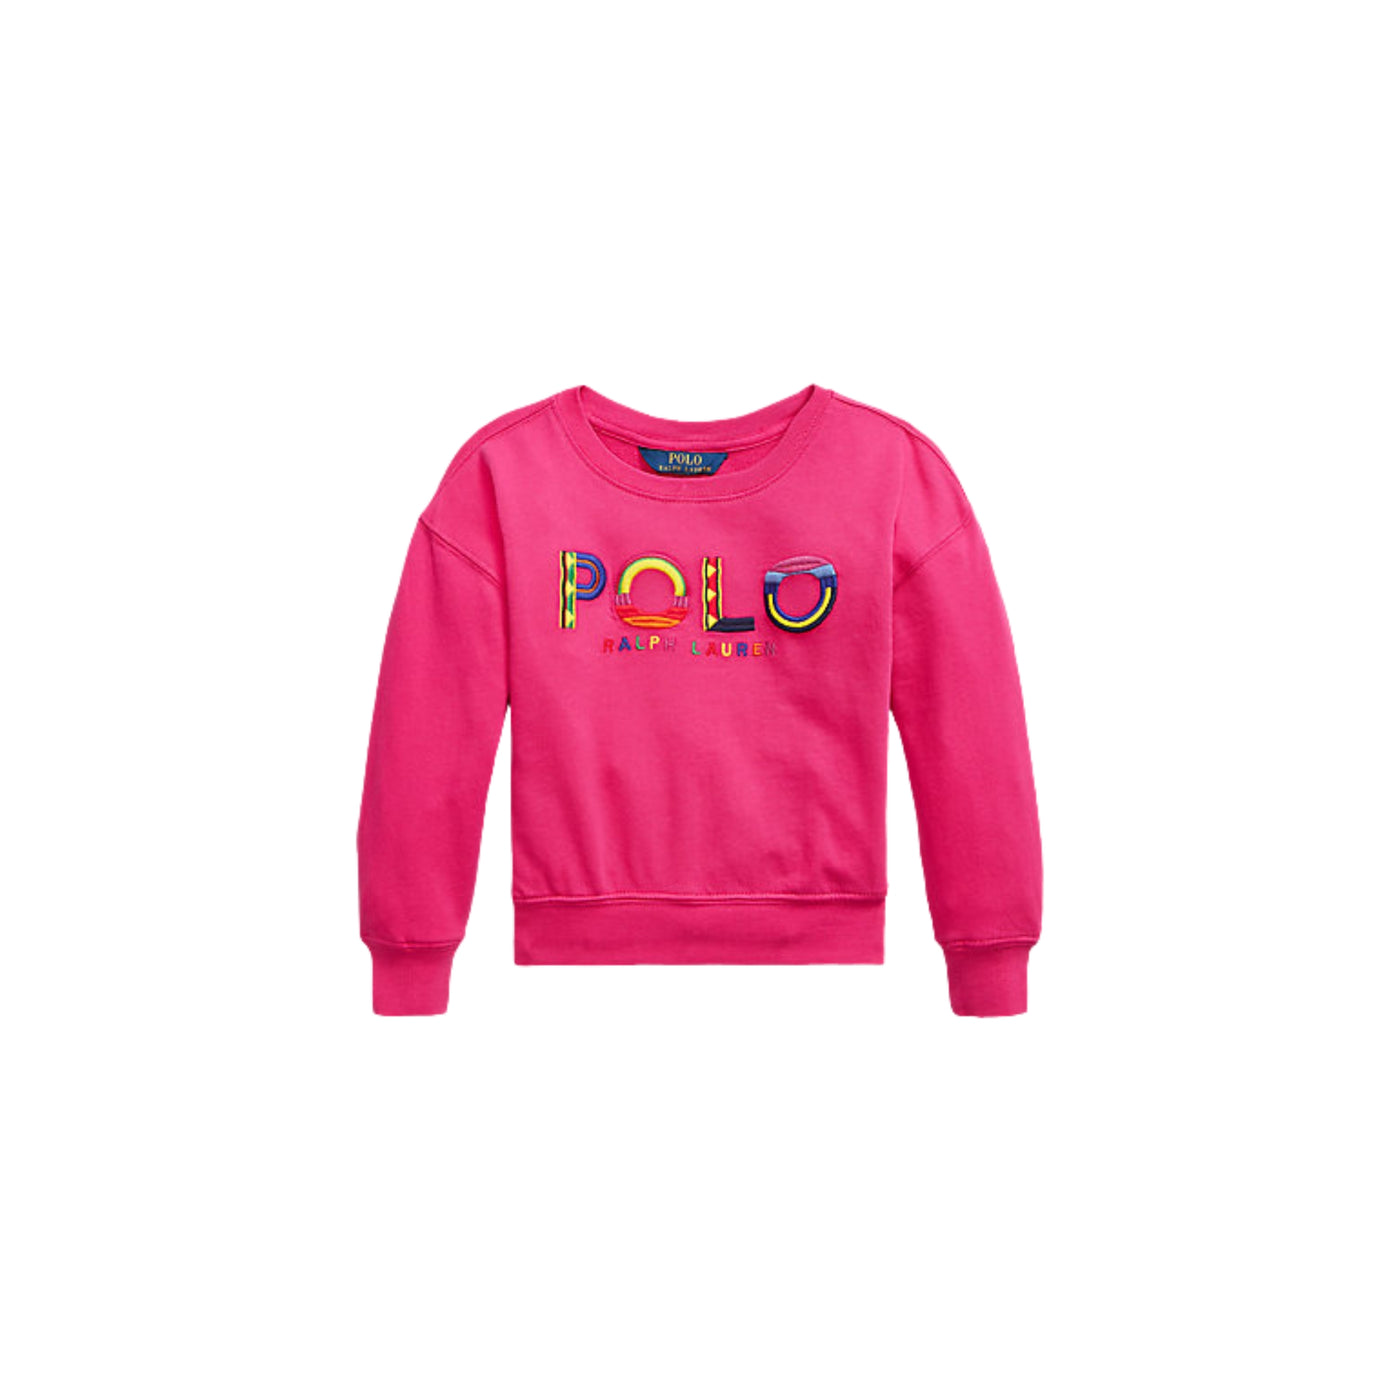 Sweatshirt for girls 5-7 years with colored logo